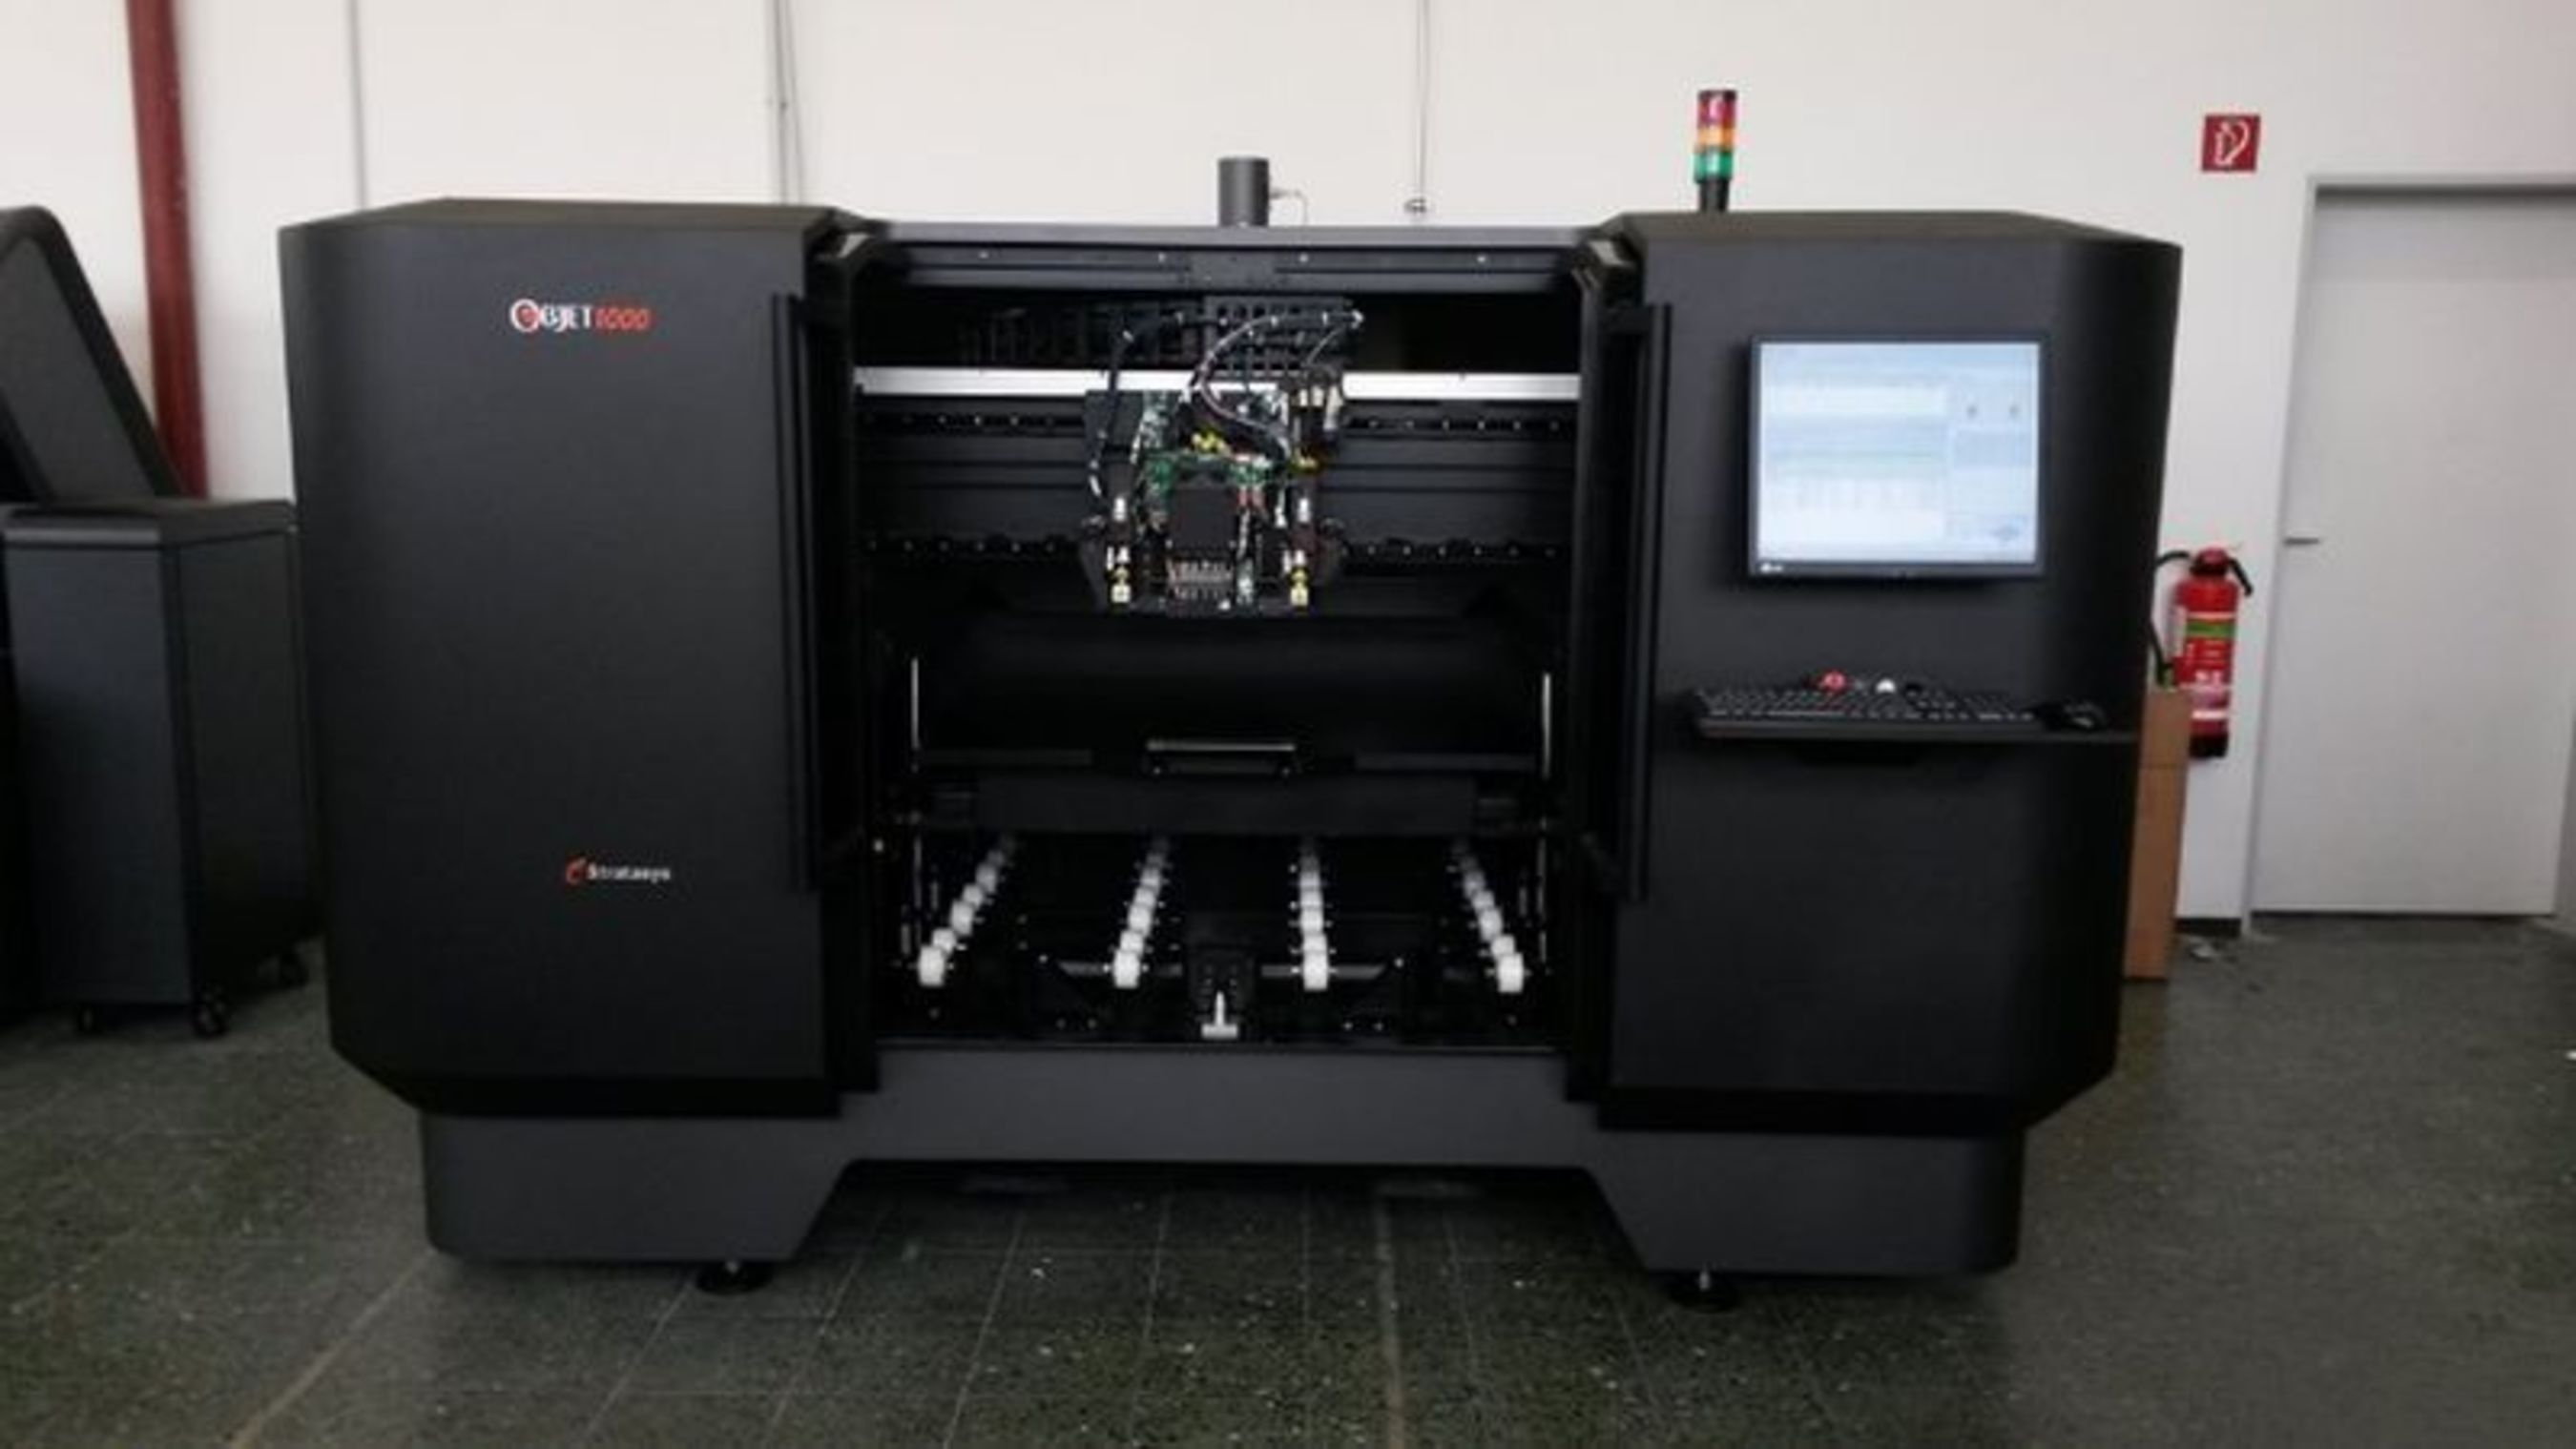 Aachen University has the worldâeuro(TM)s largest multi-material 3D printer from Stratasys, the Objet1000, with the ability to produce parts combining hard and soft materials, all in a single build. (PRNewsFoto/Stratasys Ltd)